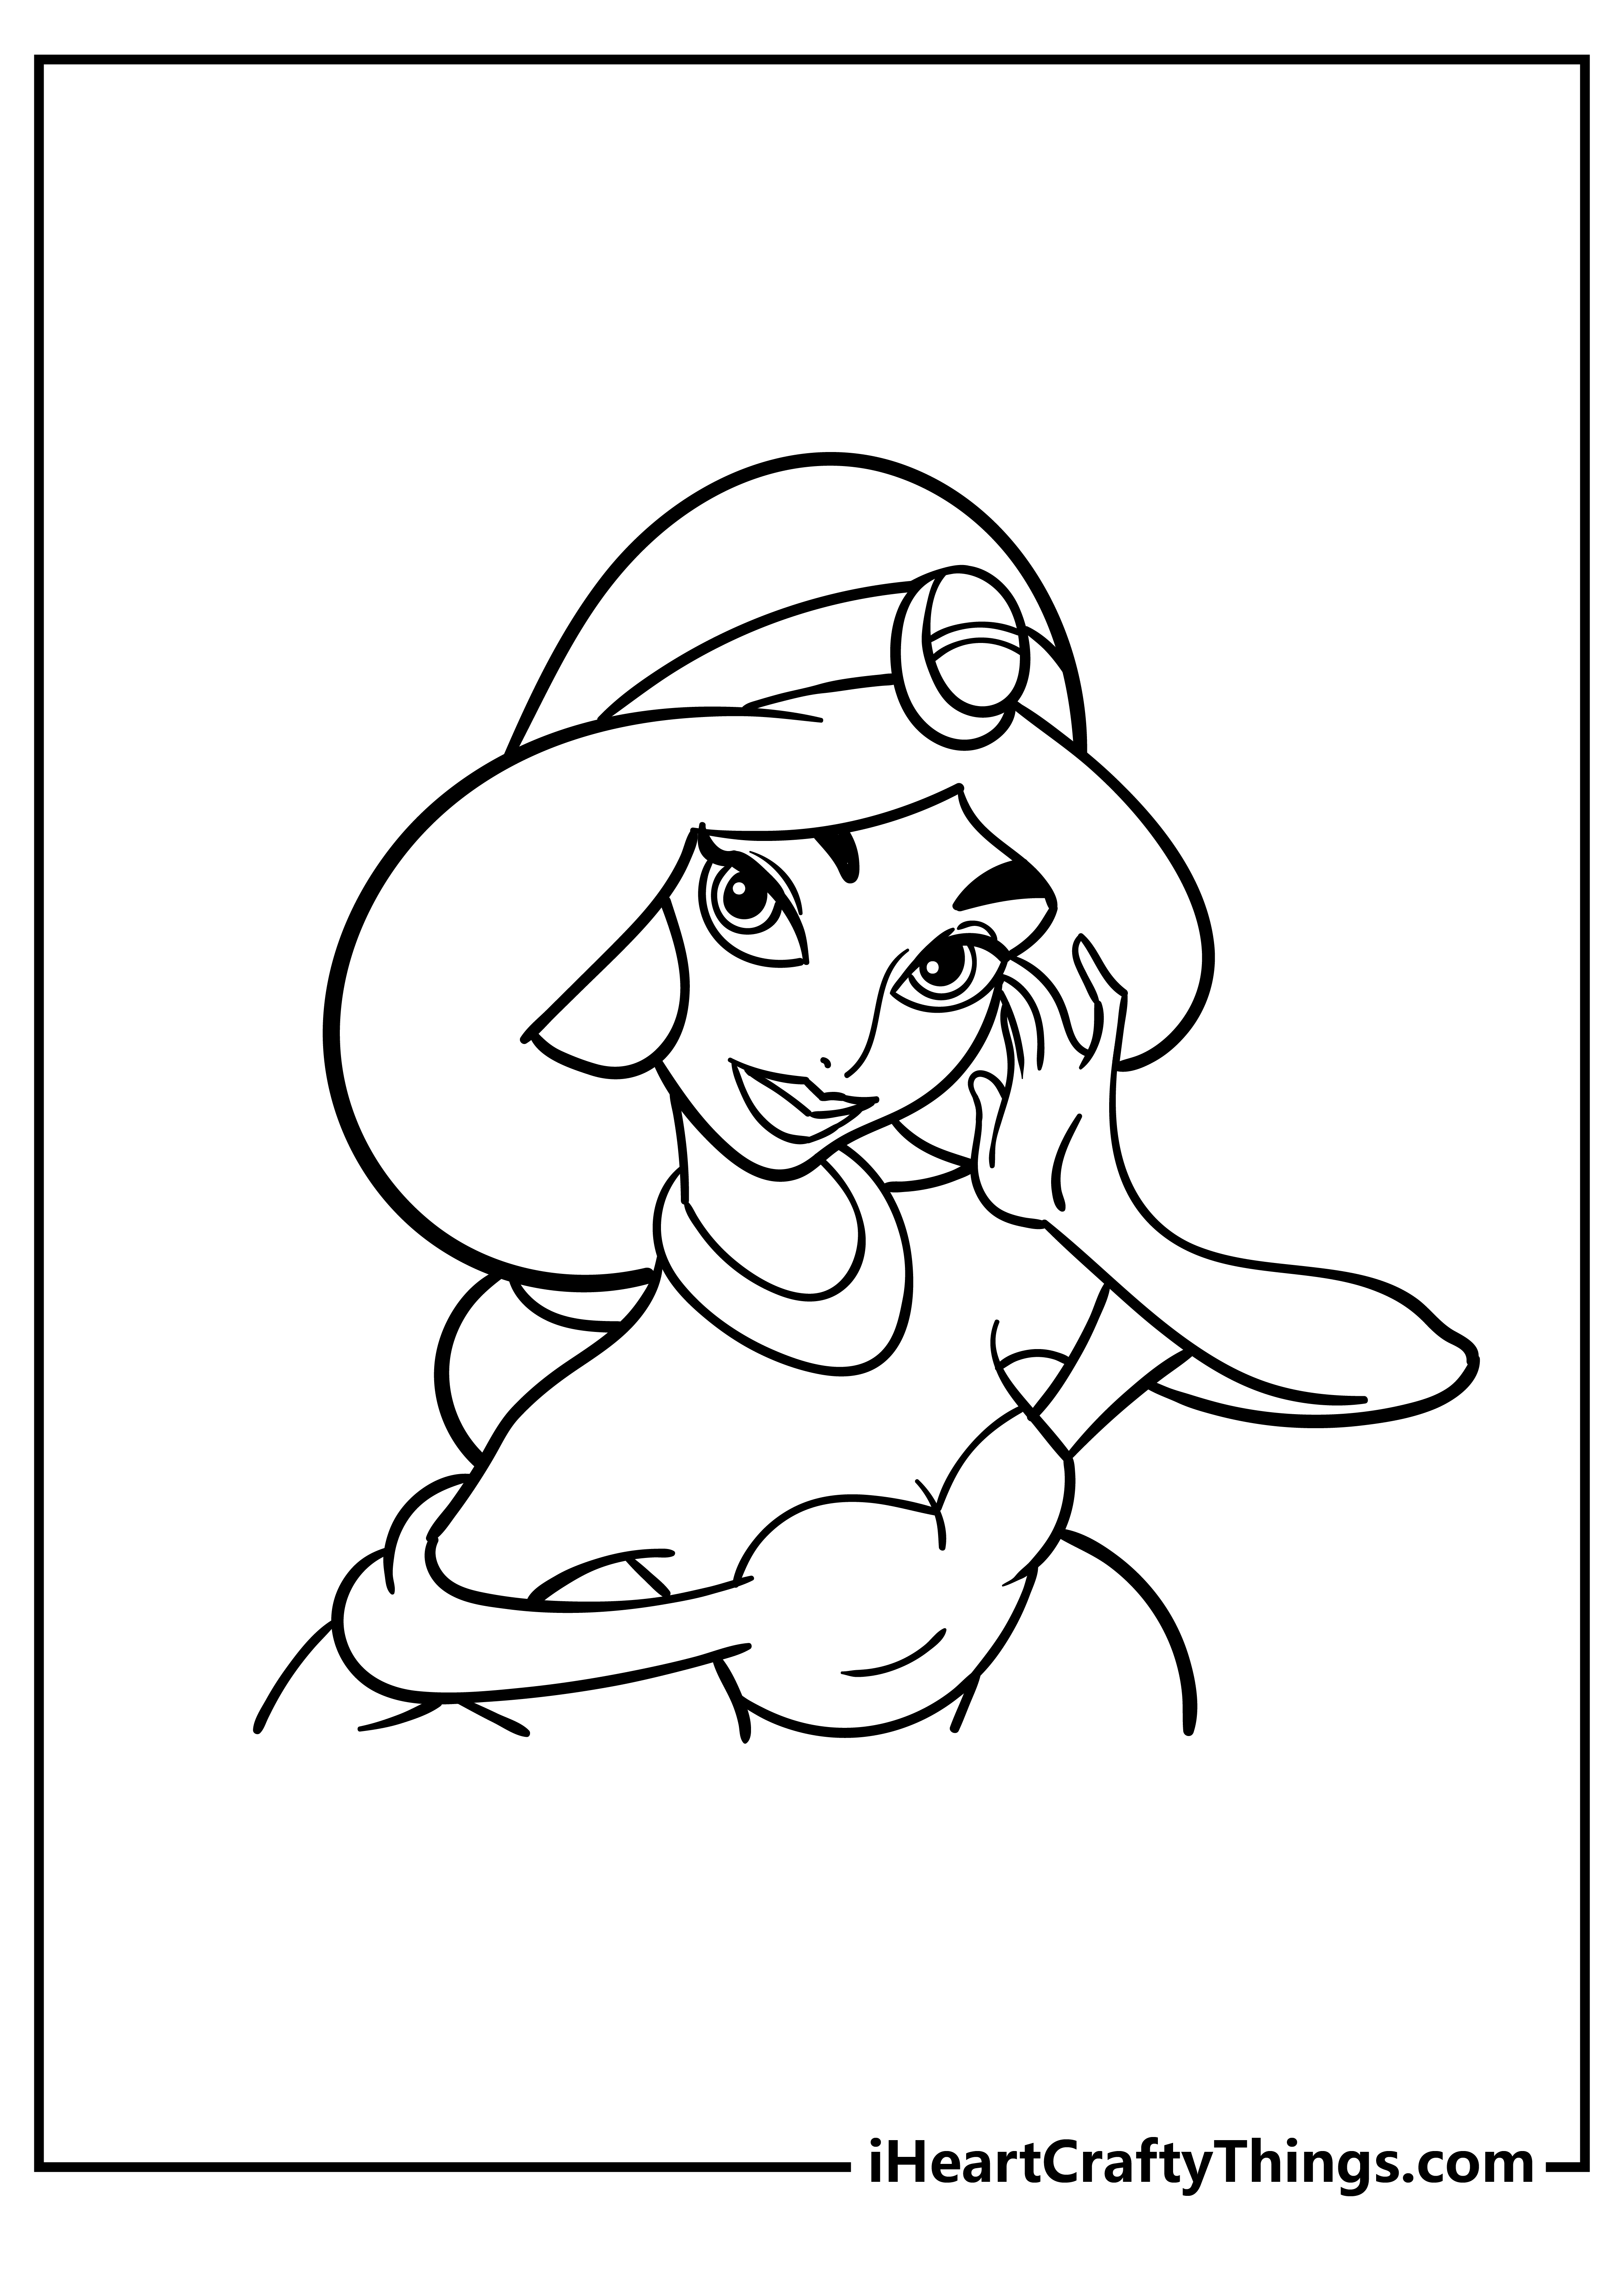 Jasmine Coloring Pages for preschoolers free printable